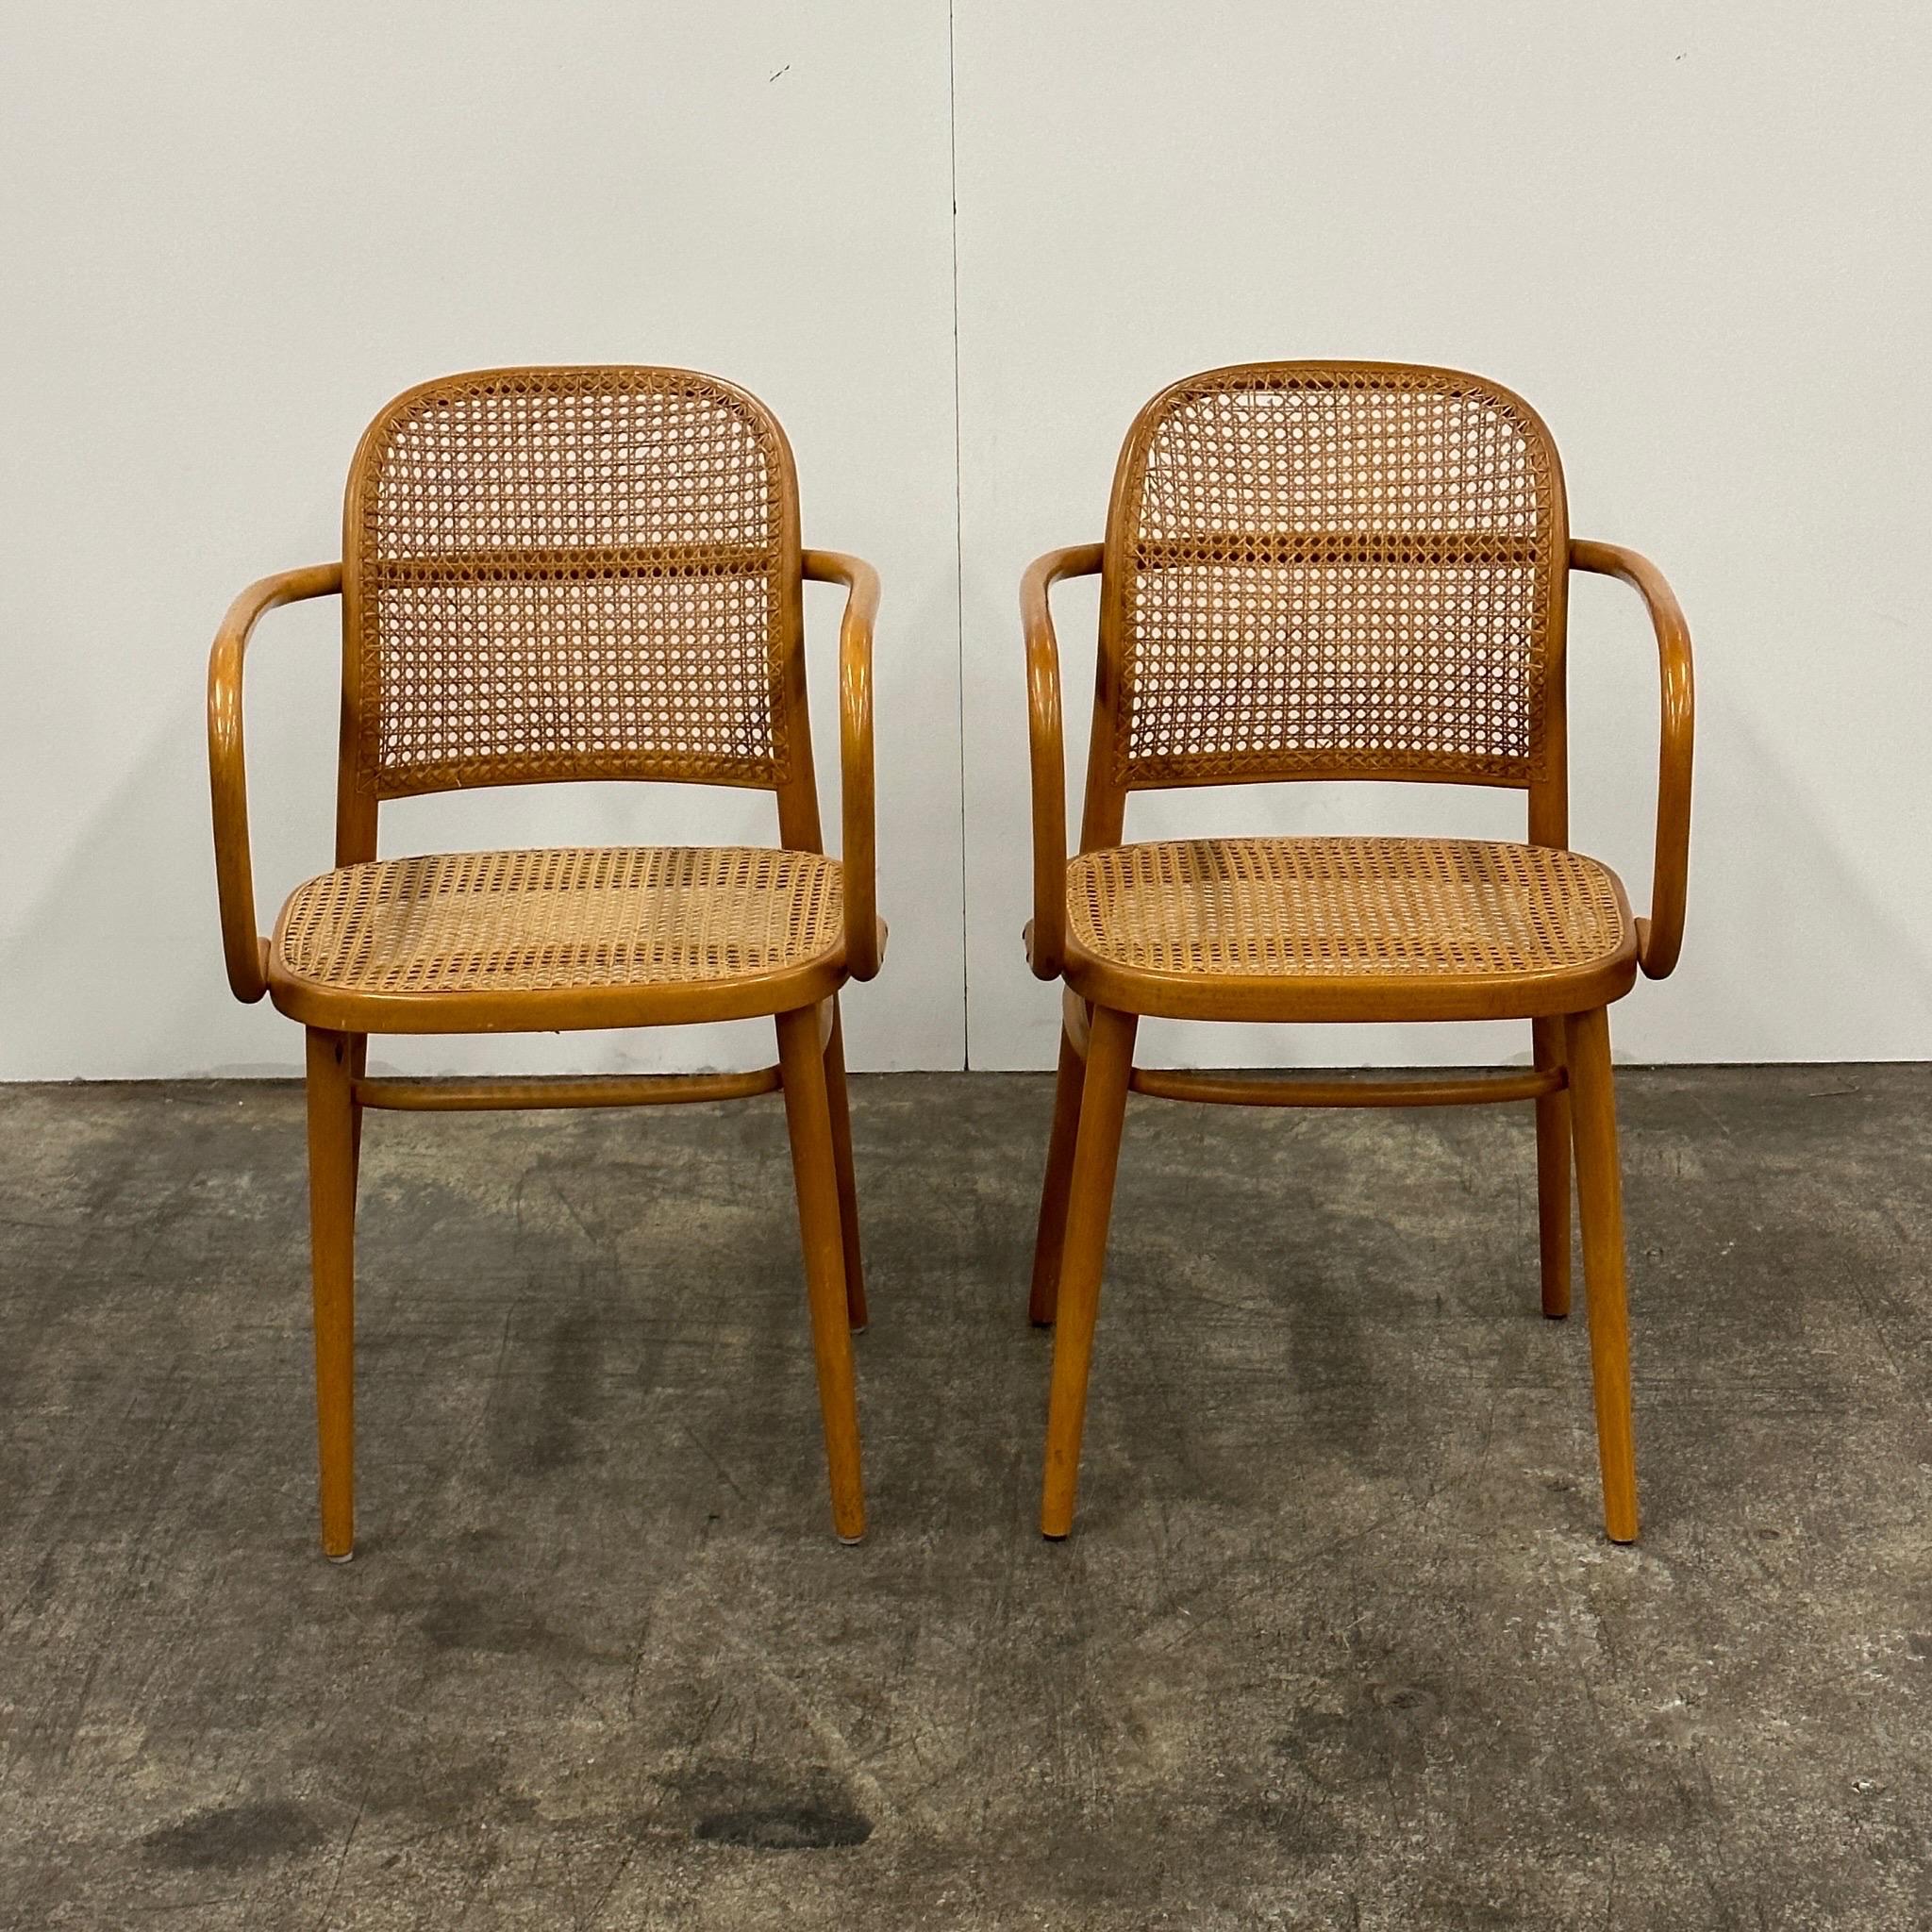 Late 20th Century No.811 “Prague” Chairs by Josef Hoffman for Thonet For Sale